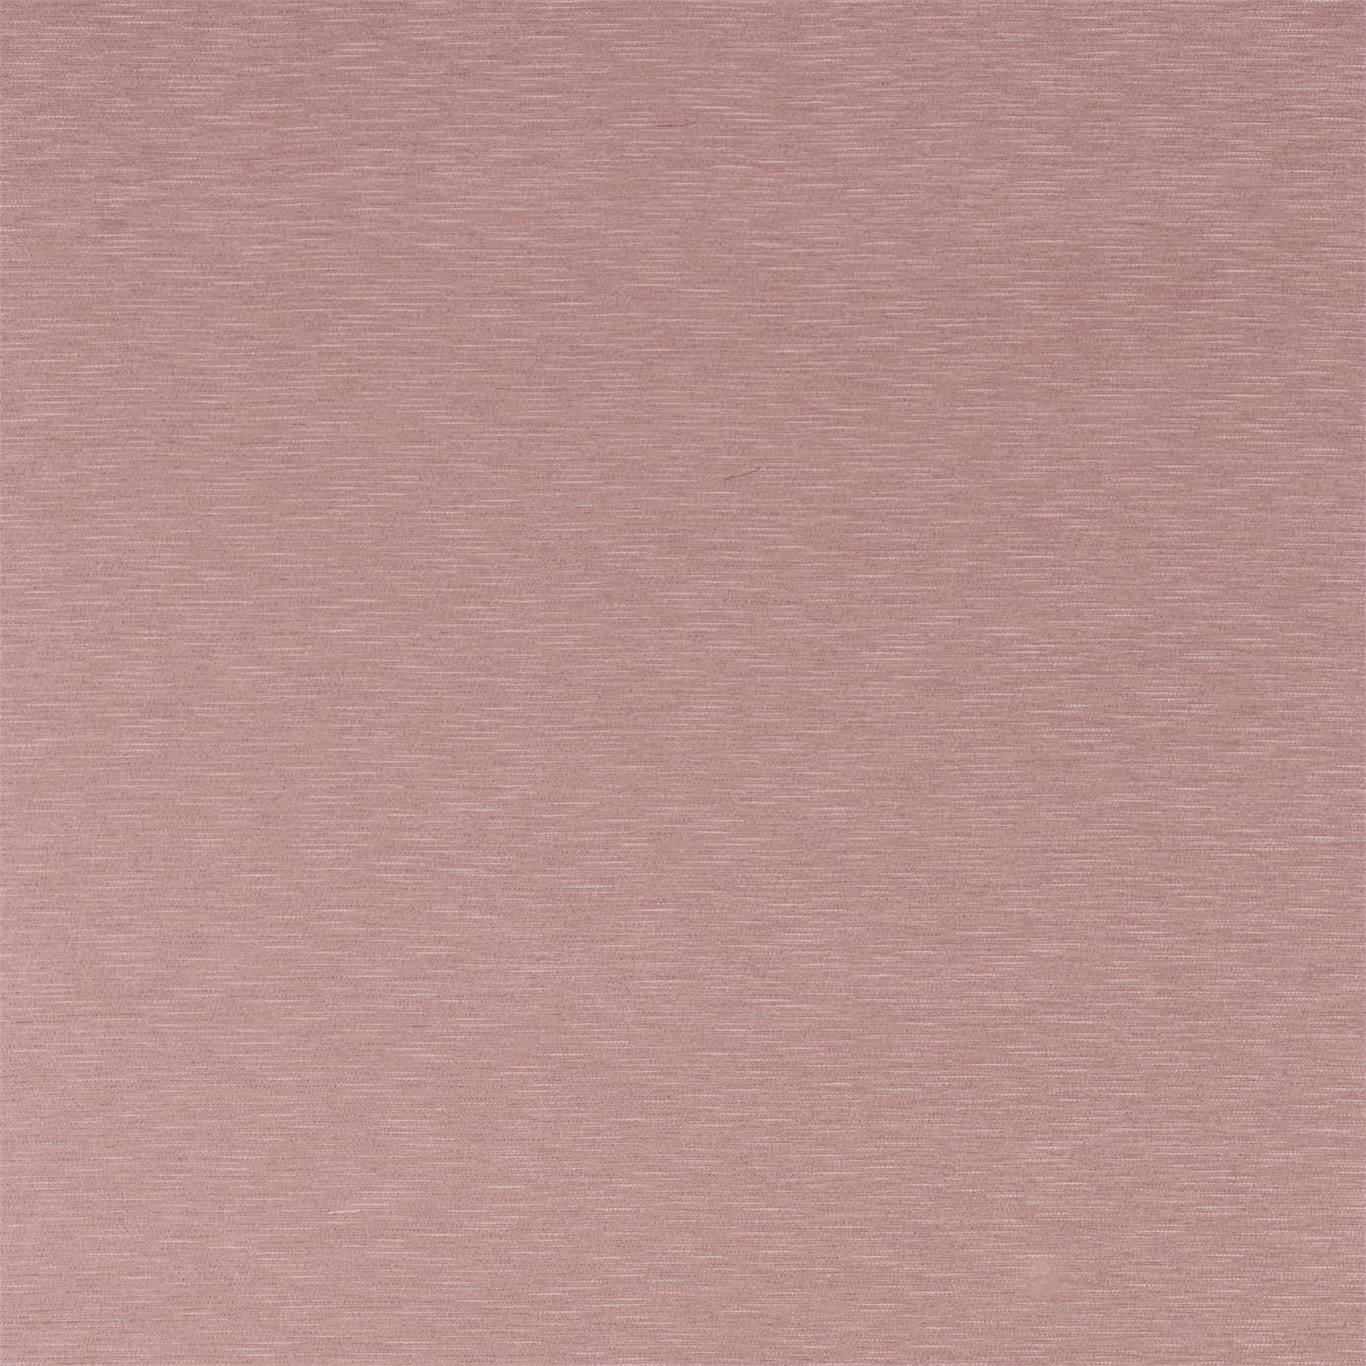 Lineate Blush Fabric by HAR